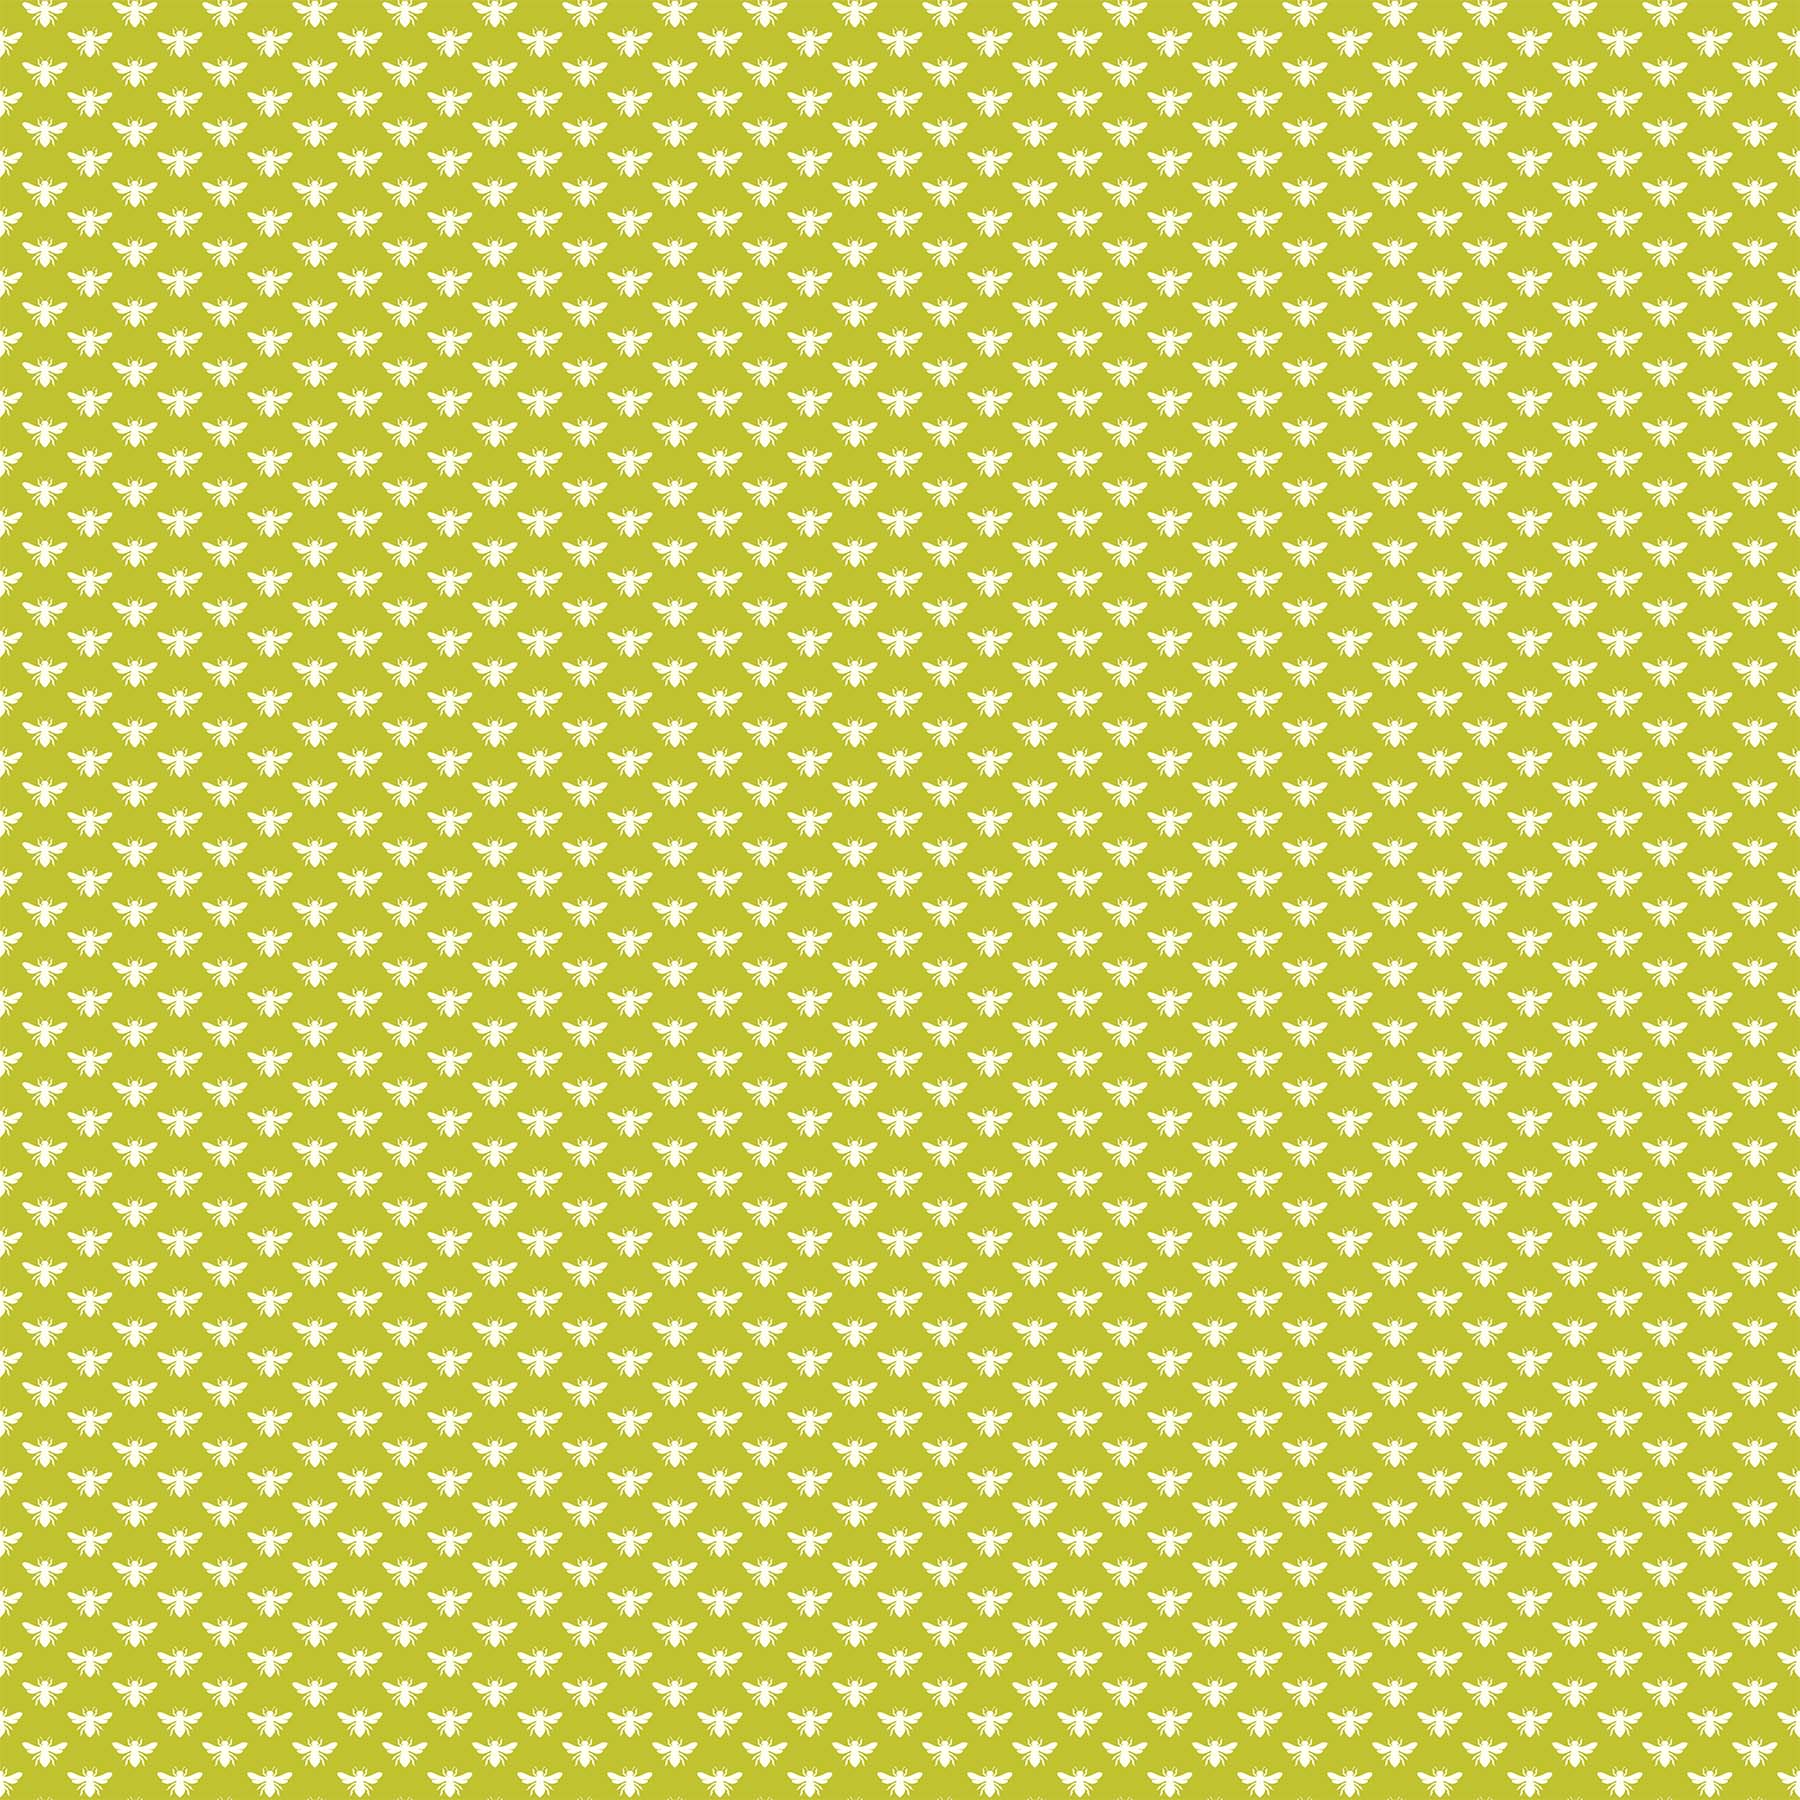 Local Honey Quilt Fabric - Bee Dot in Chartreuse Green - 90663-70